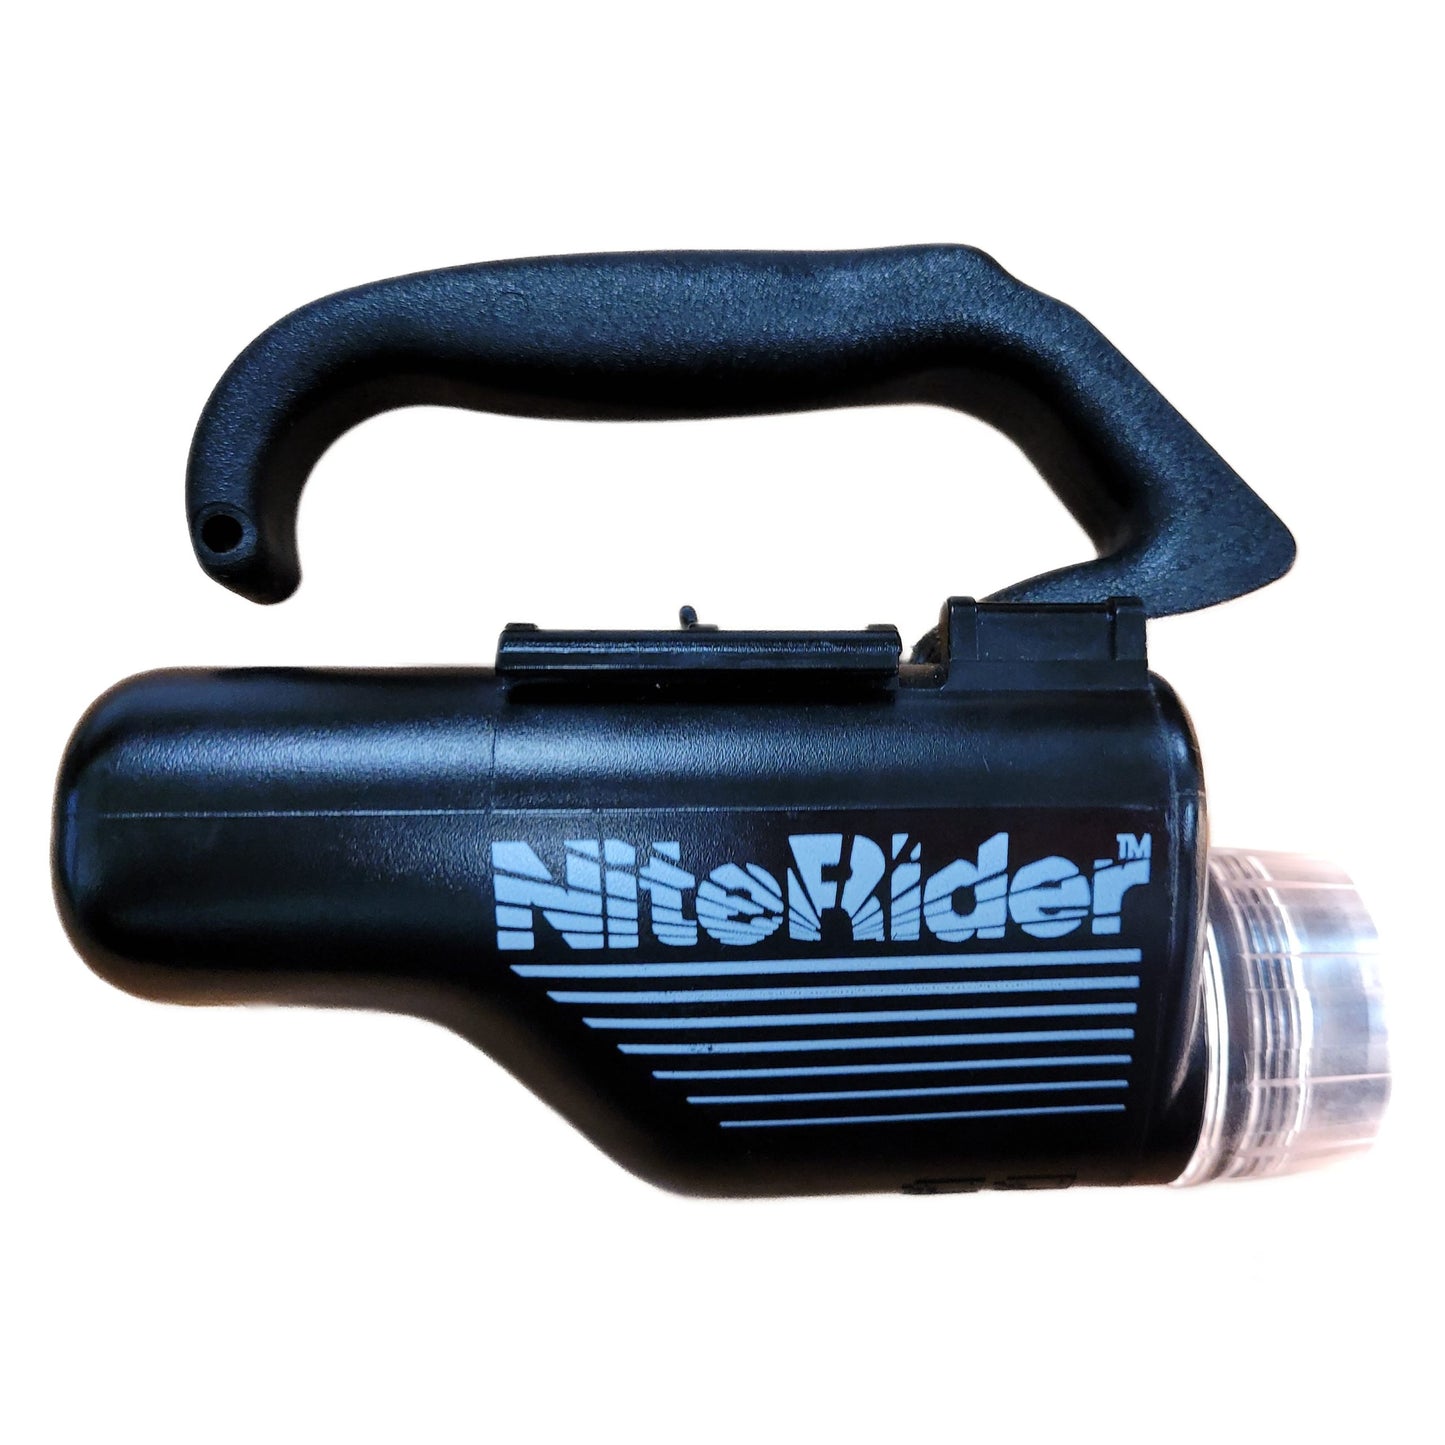 NiteRider Technical Dive Torch